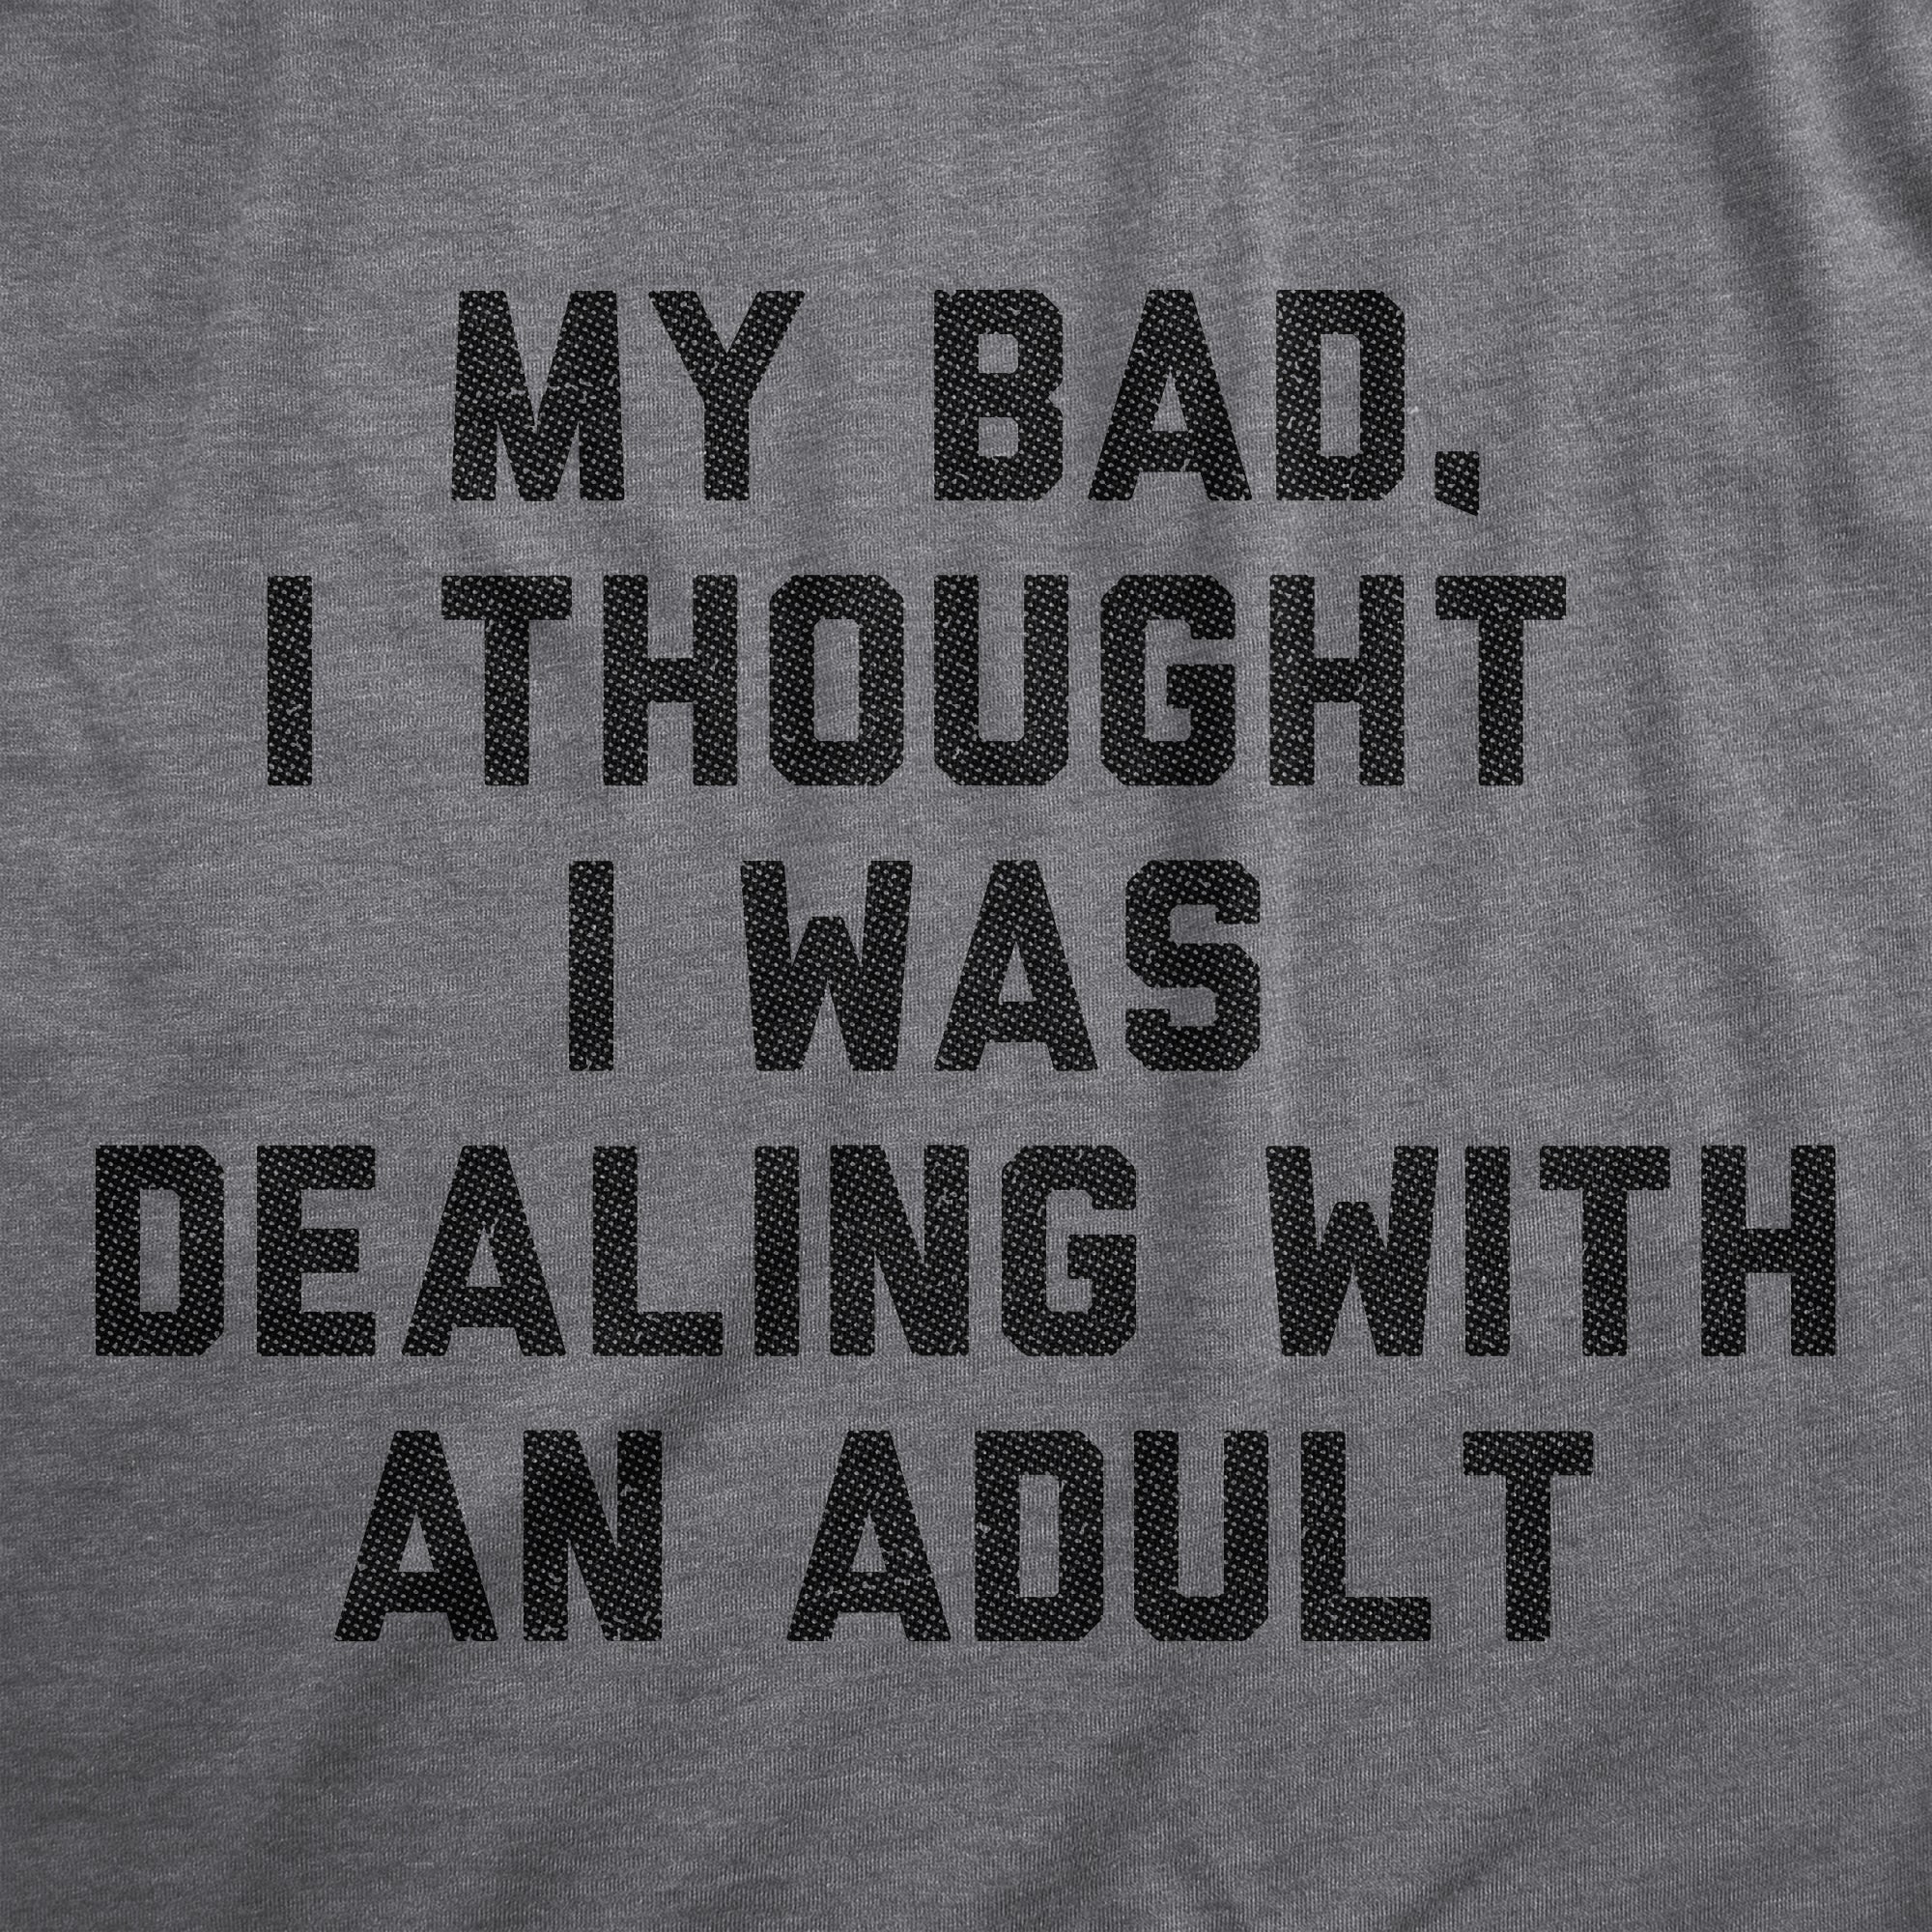 Funny Dark Heather Grey - ADULT My Bad I Thought I Was Dealing With An Adult Onesie Nerdy Sarcastic Tee